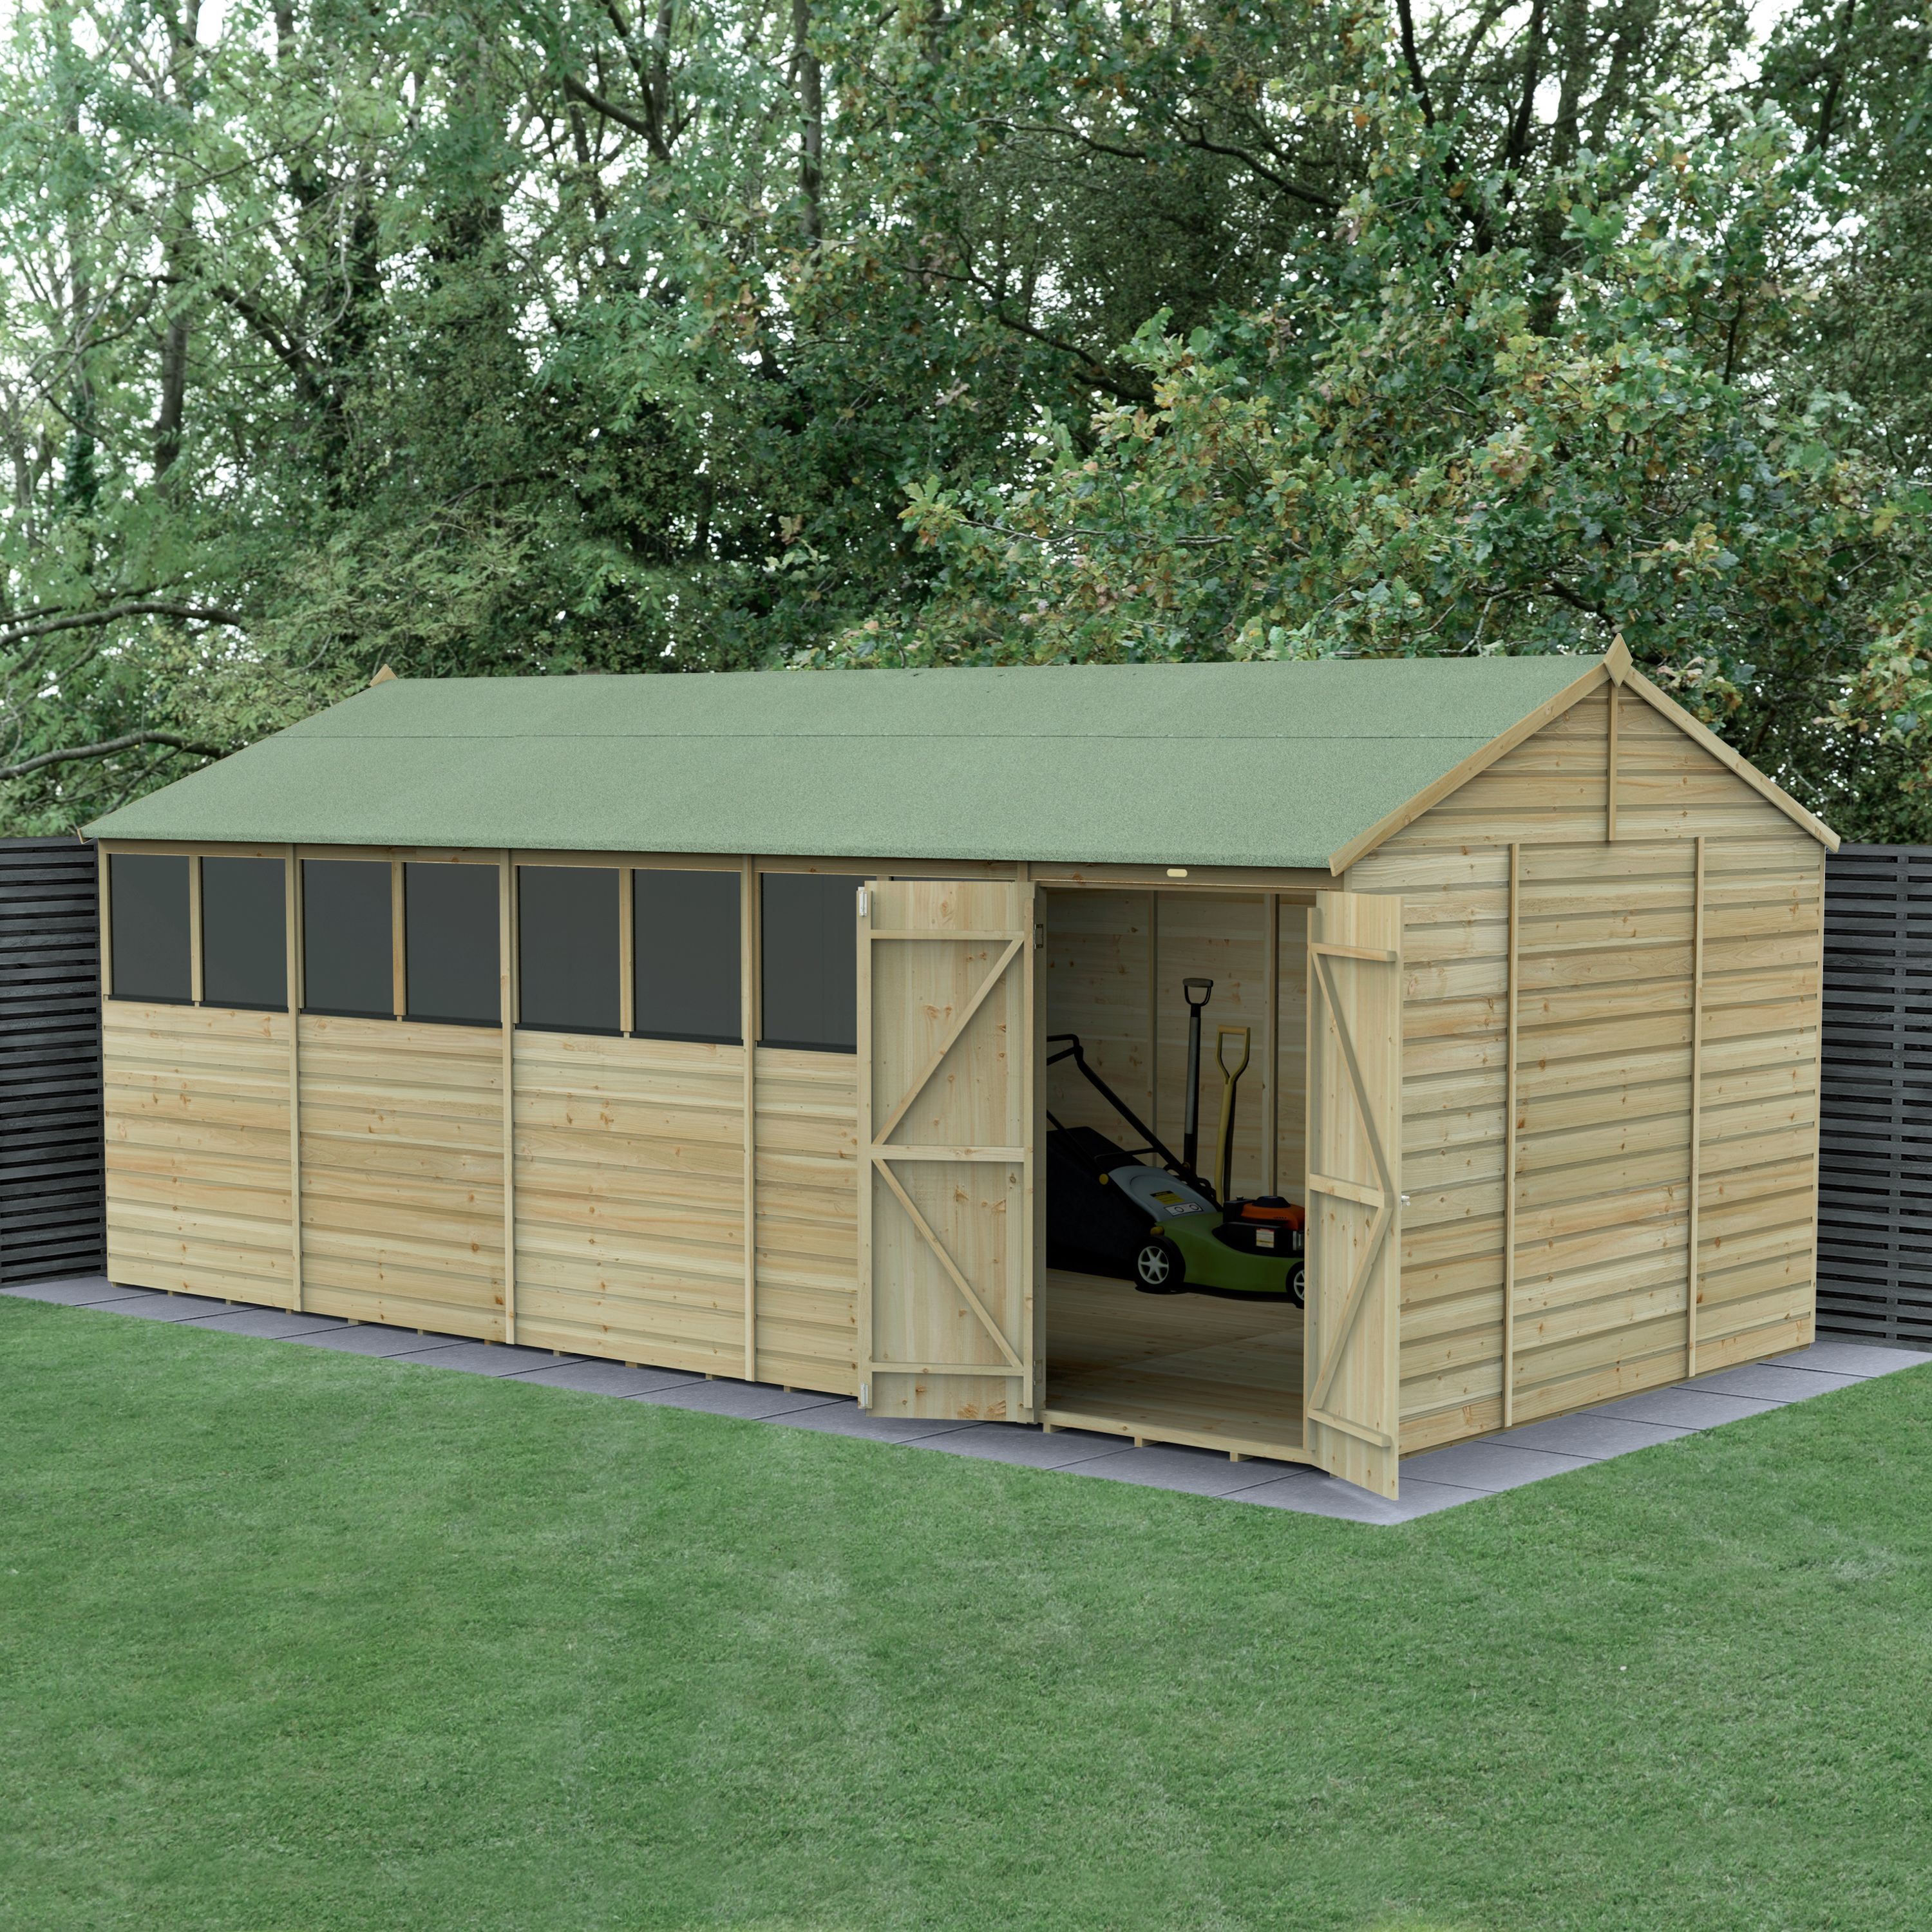 Forest Garden Beckwood Shiplap 20x10 ft Reverse apex Natural timber Wooden Pressure treated 2 door Shed with floor & 8 windows - Assembly service included